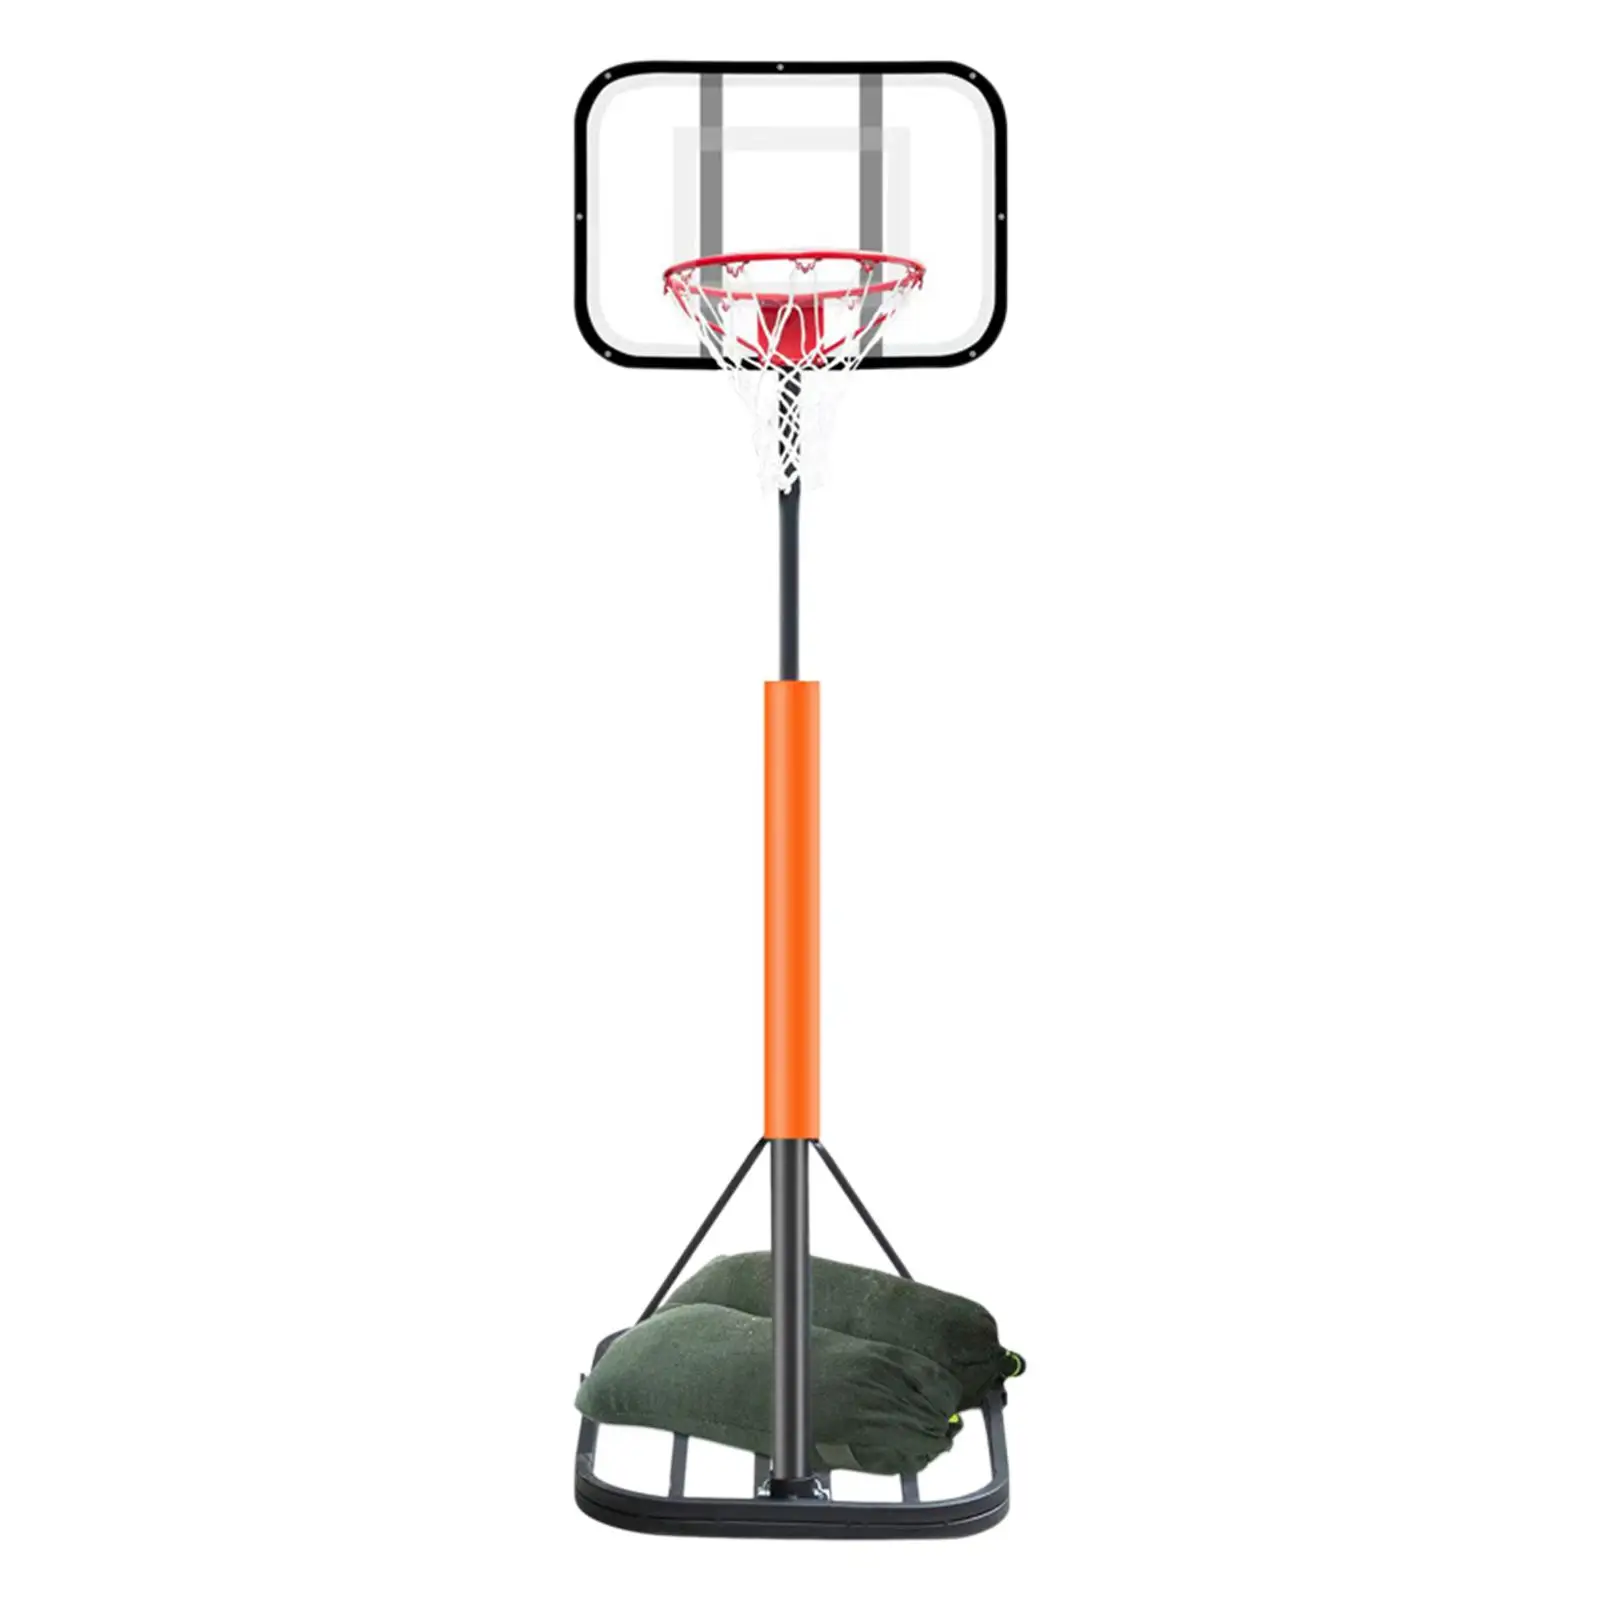 Portable Basketball Hoop Stand Adjustable Indoor Outdoor Backboard System Basketball Goal for Yard Youth Children Teenagers